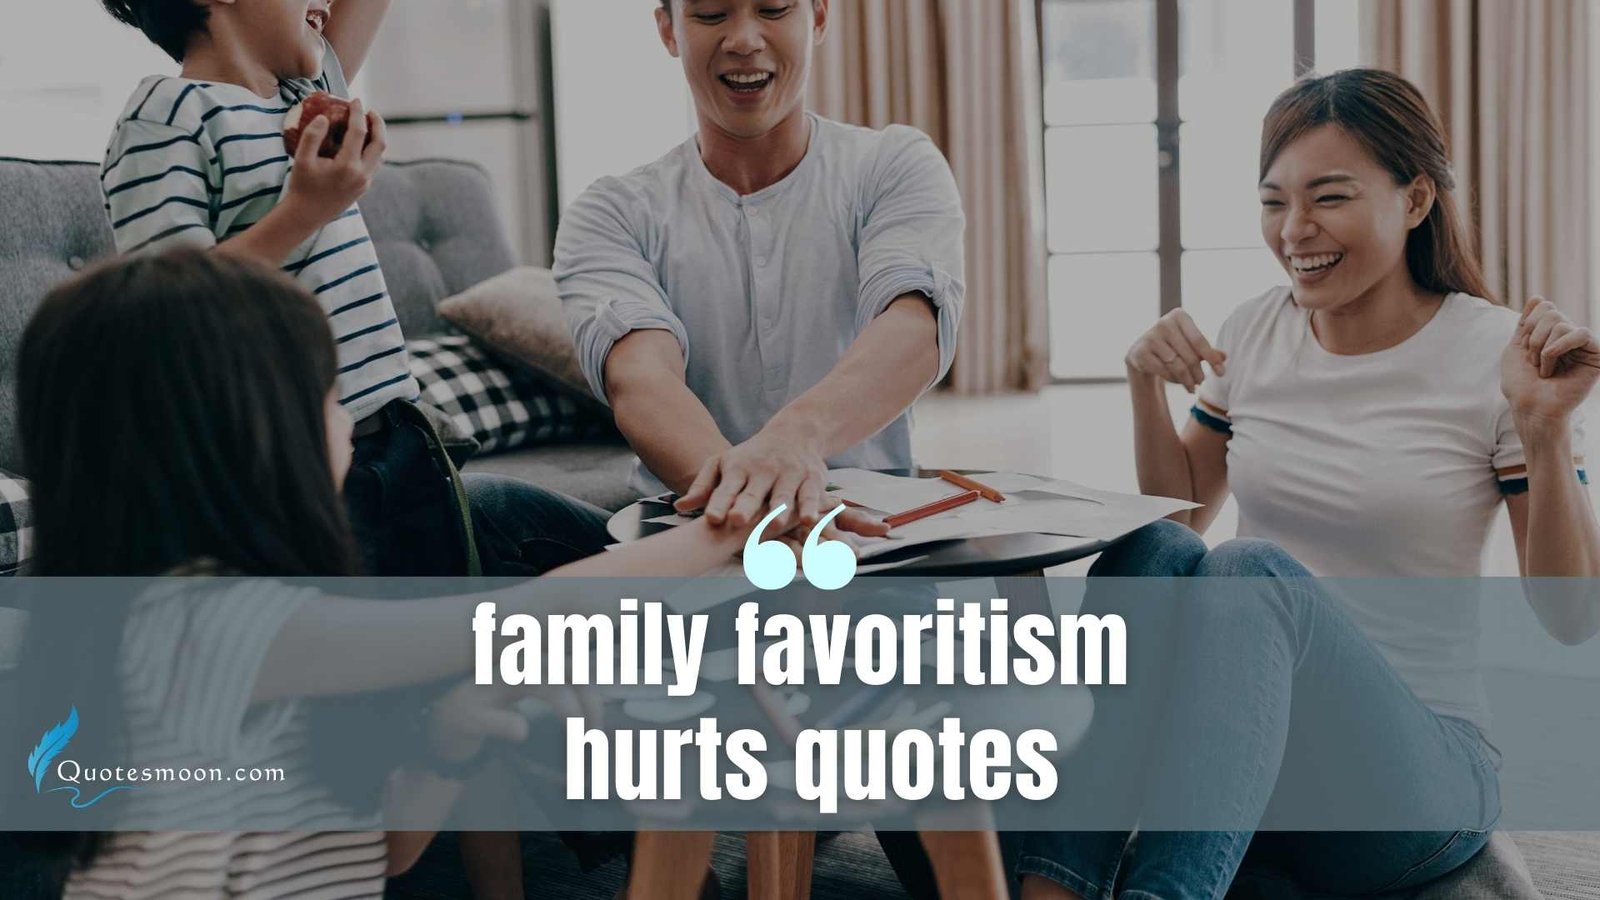 family favoritism hurts quotes images